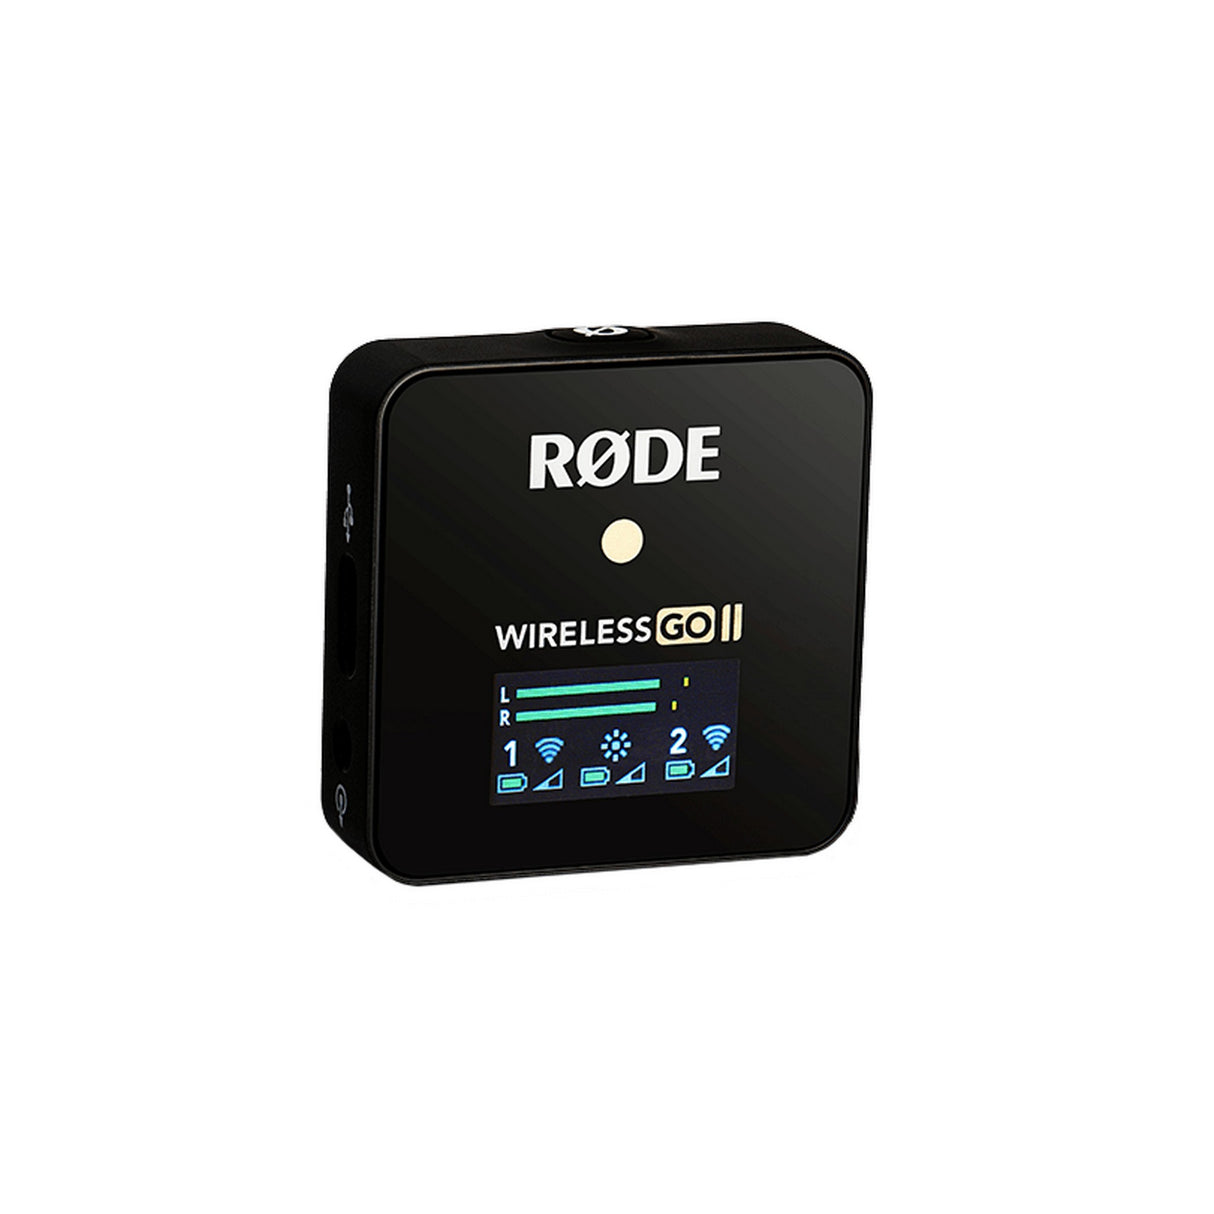 RODE Wireless GO II RX Ultra-Compact Wireless Microphone Receiver